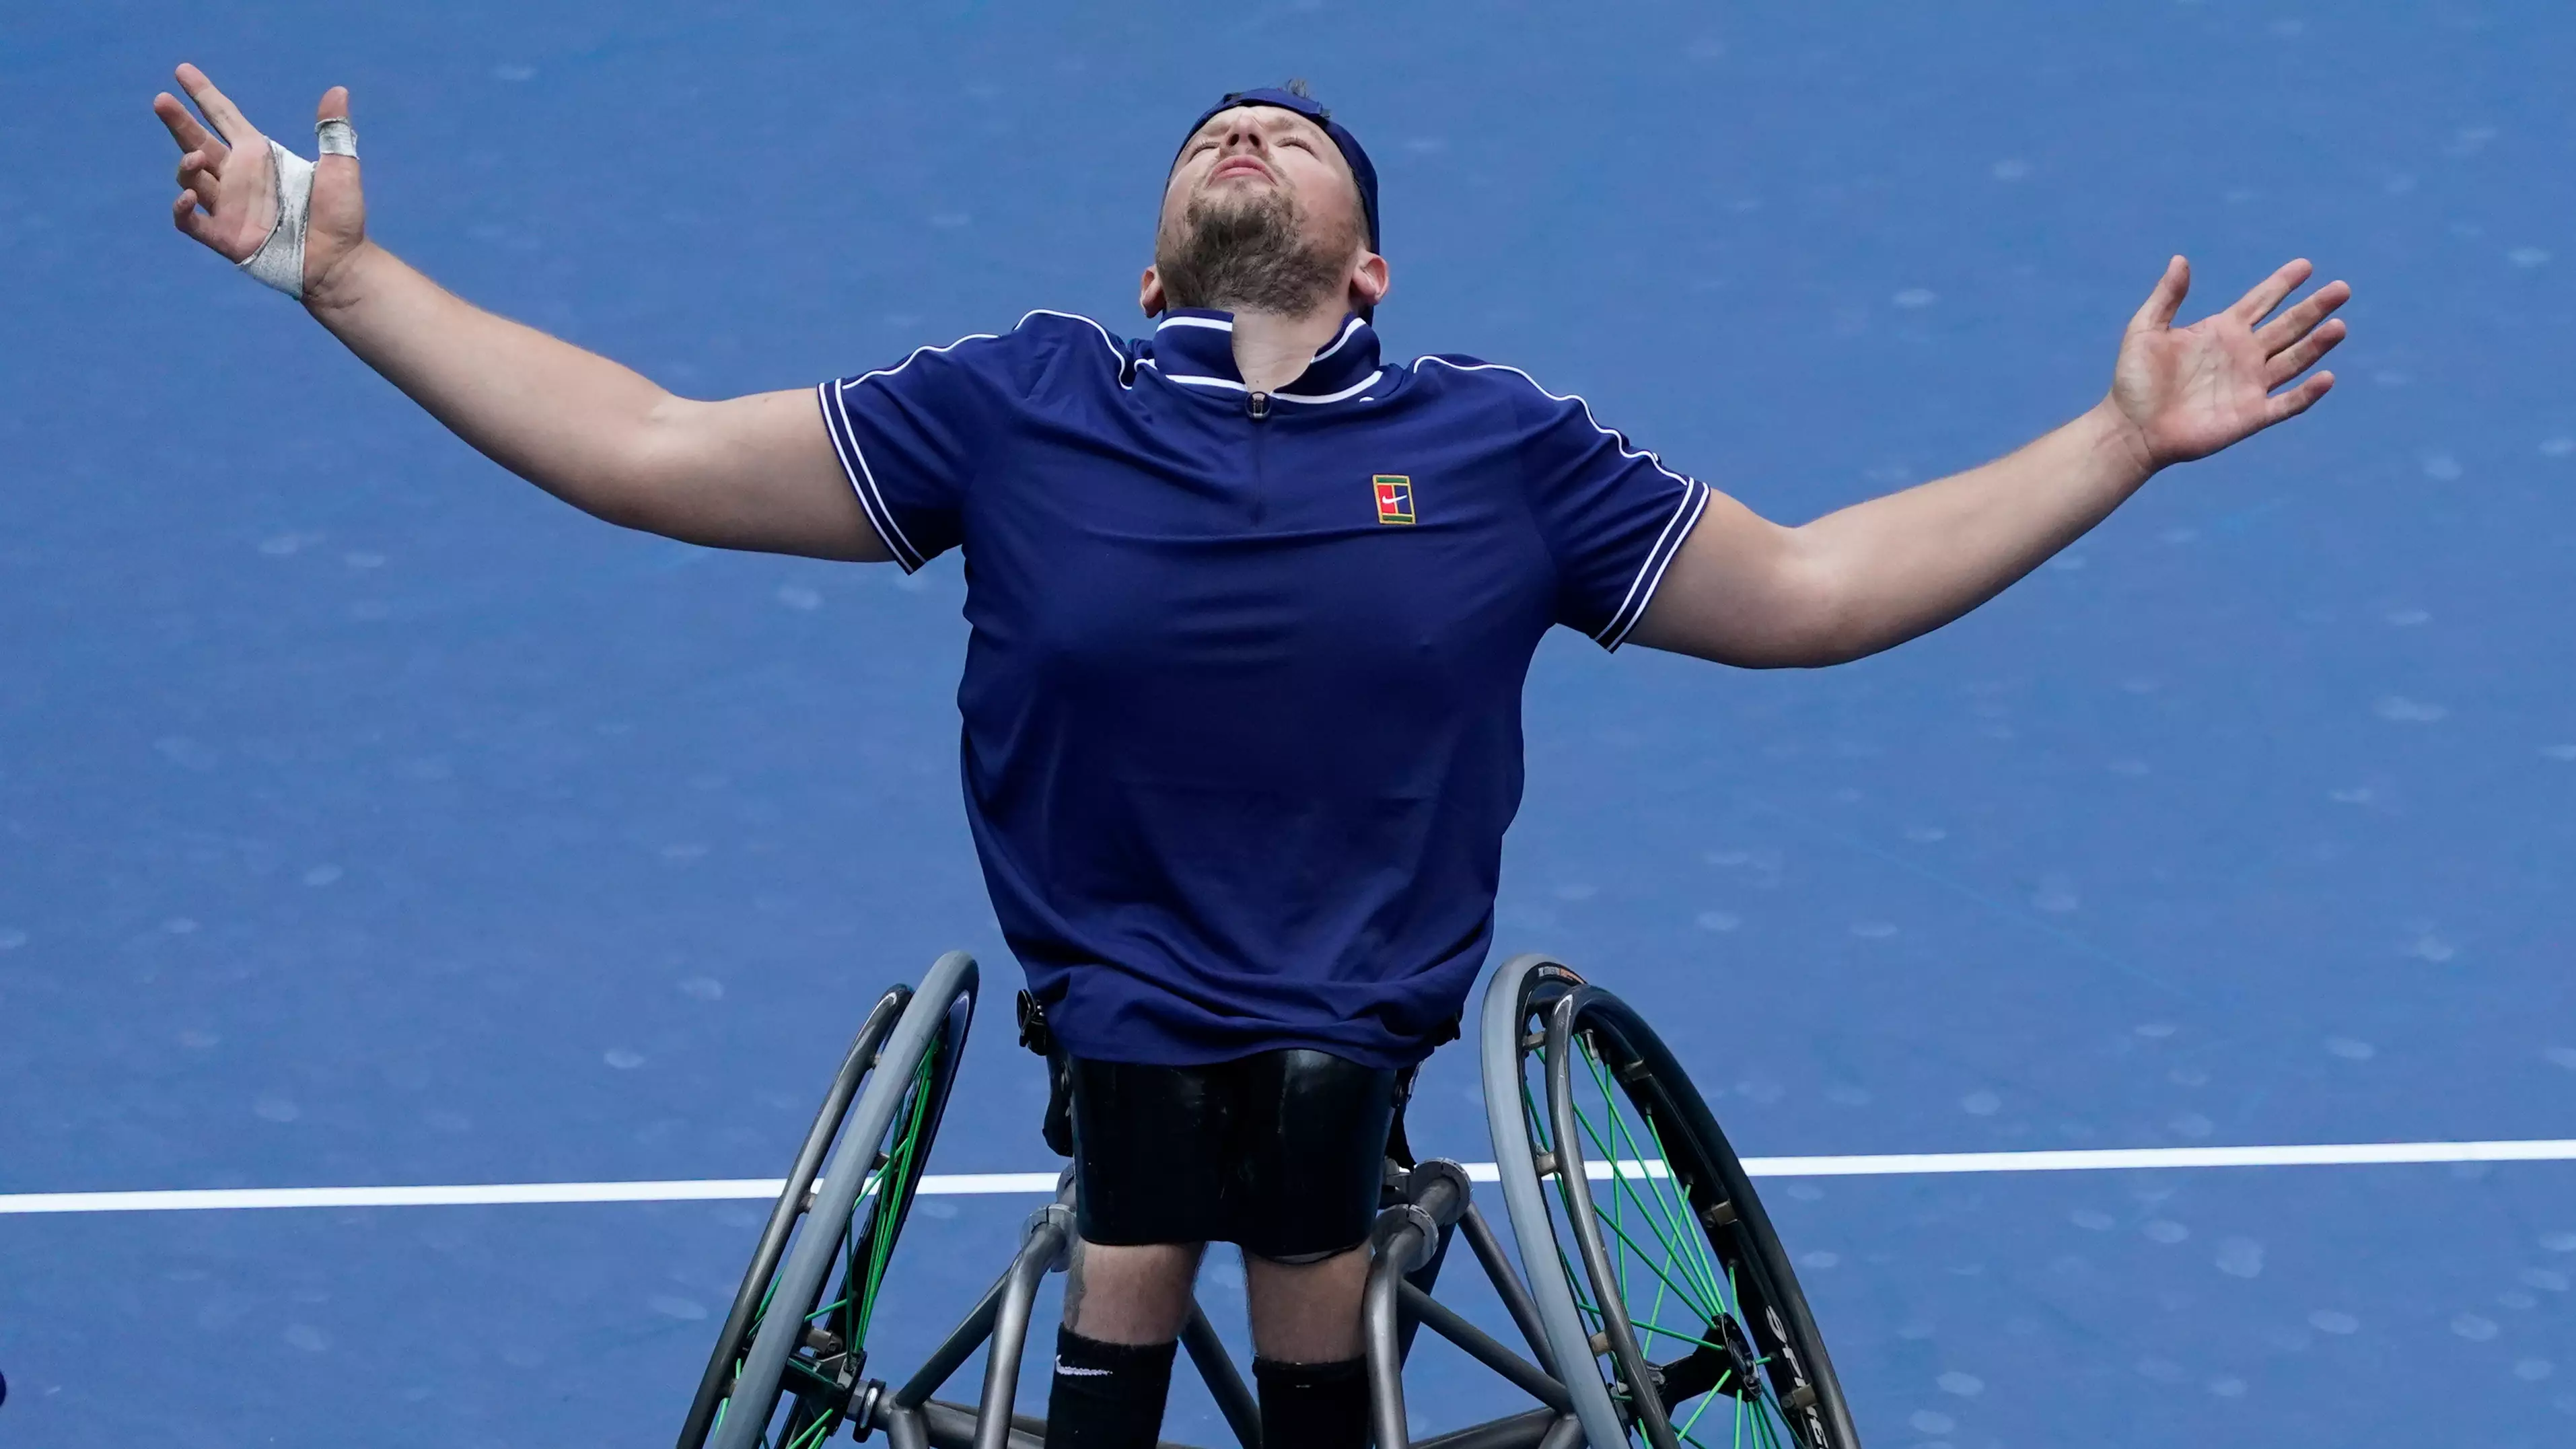 Dylan Alcott Achieves Coveted Golden Grand Slam After Winning US Open